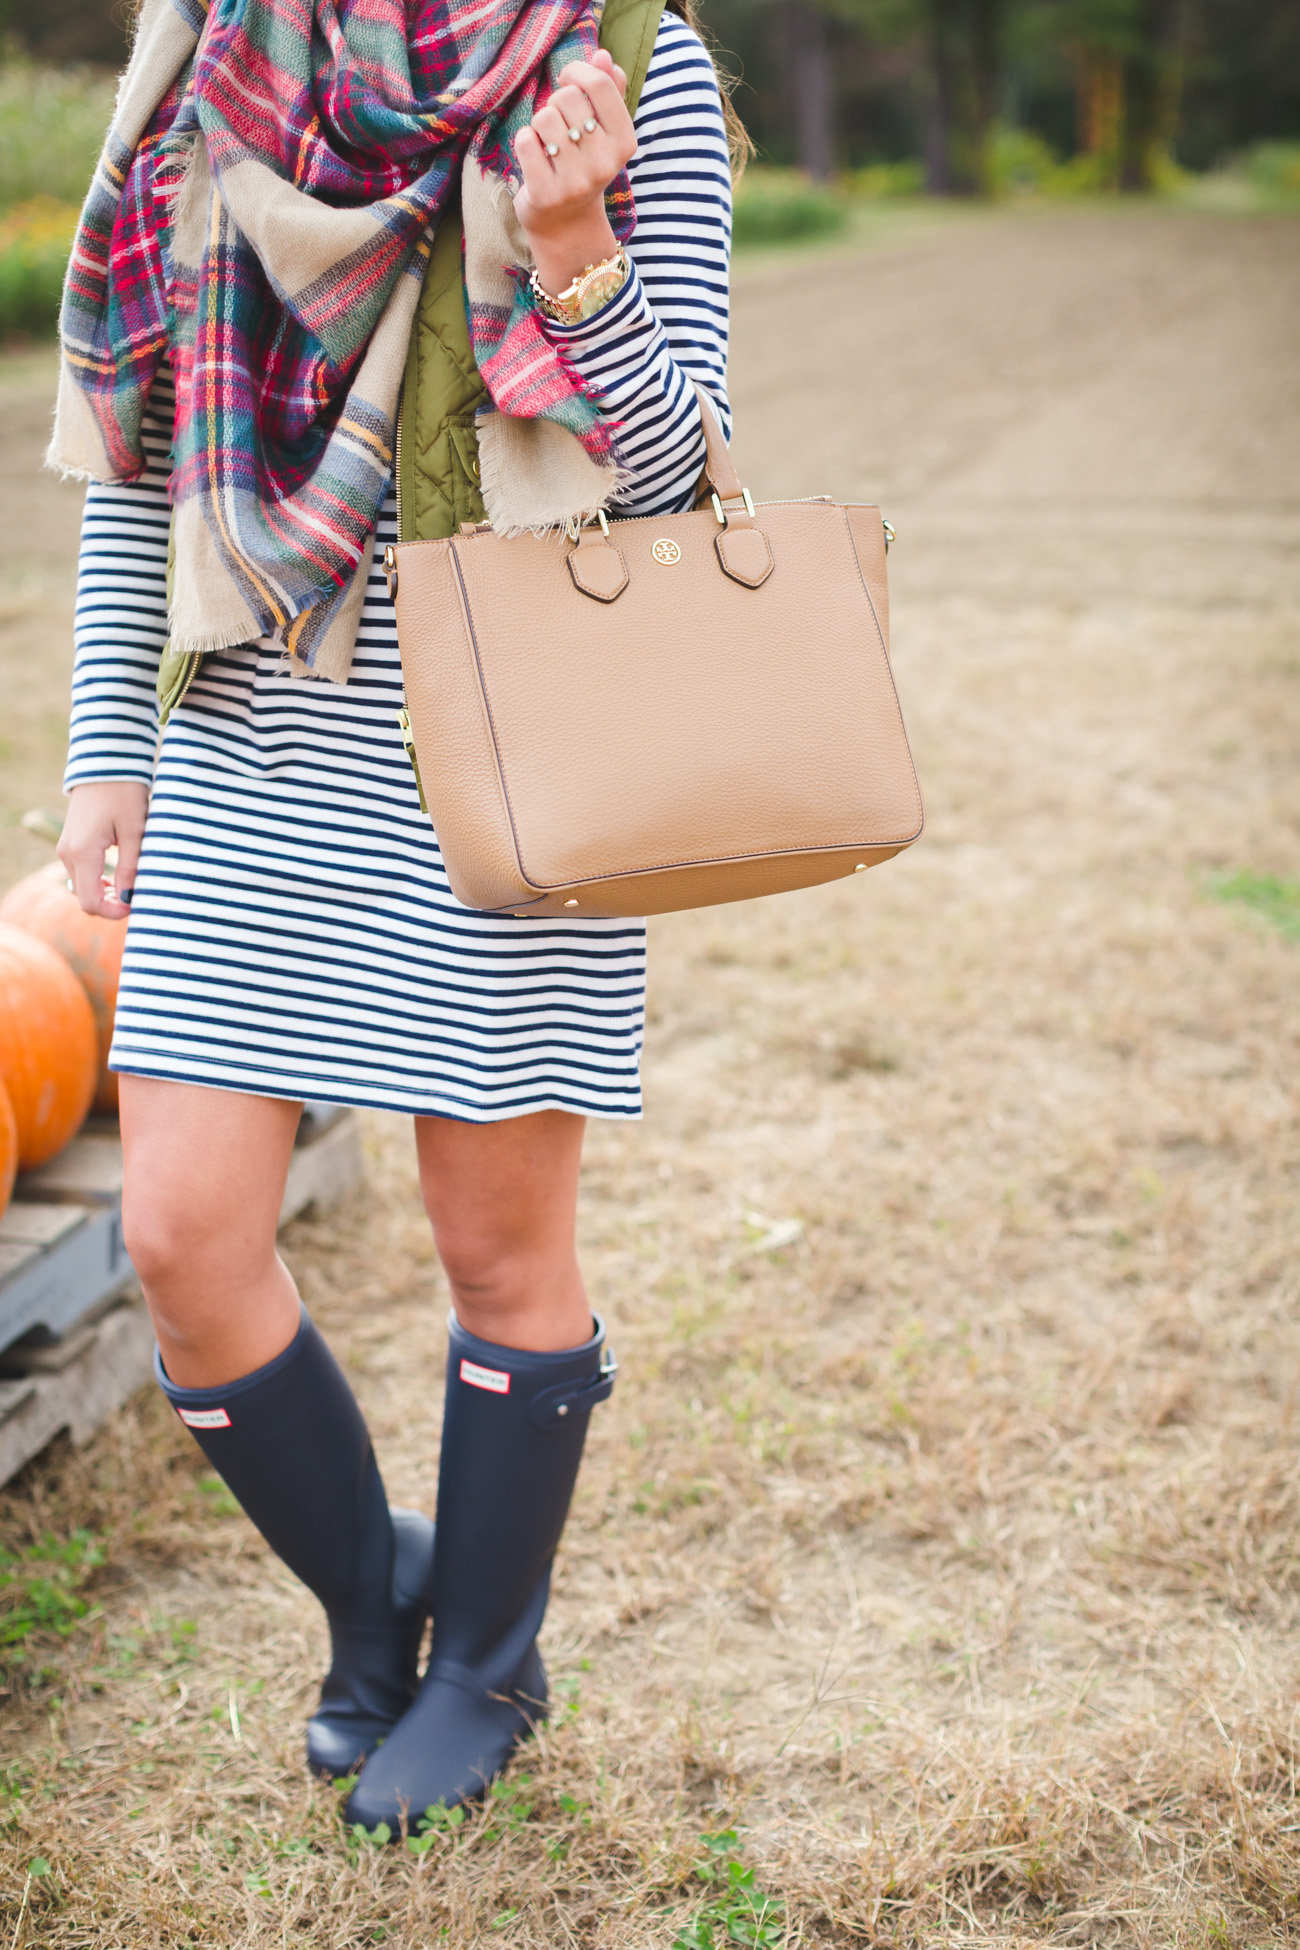 plaid blanket scarf, what to wear to a pumpkin patch, fall pumpkin patch, fall fashion, fall style, fall preppy outfit, quilted vest, excursion vest, stripe dress, hunter boots, tour packable hunter boots, fall blanket scarf, fall outfit ideas // grace wainwright from a southern drawl